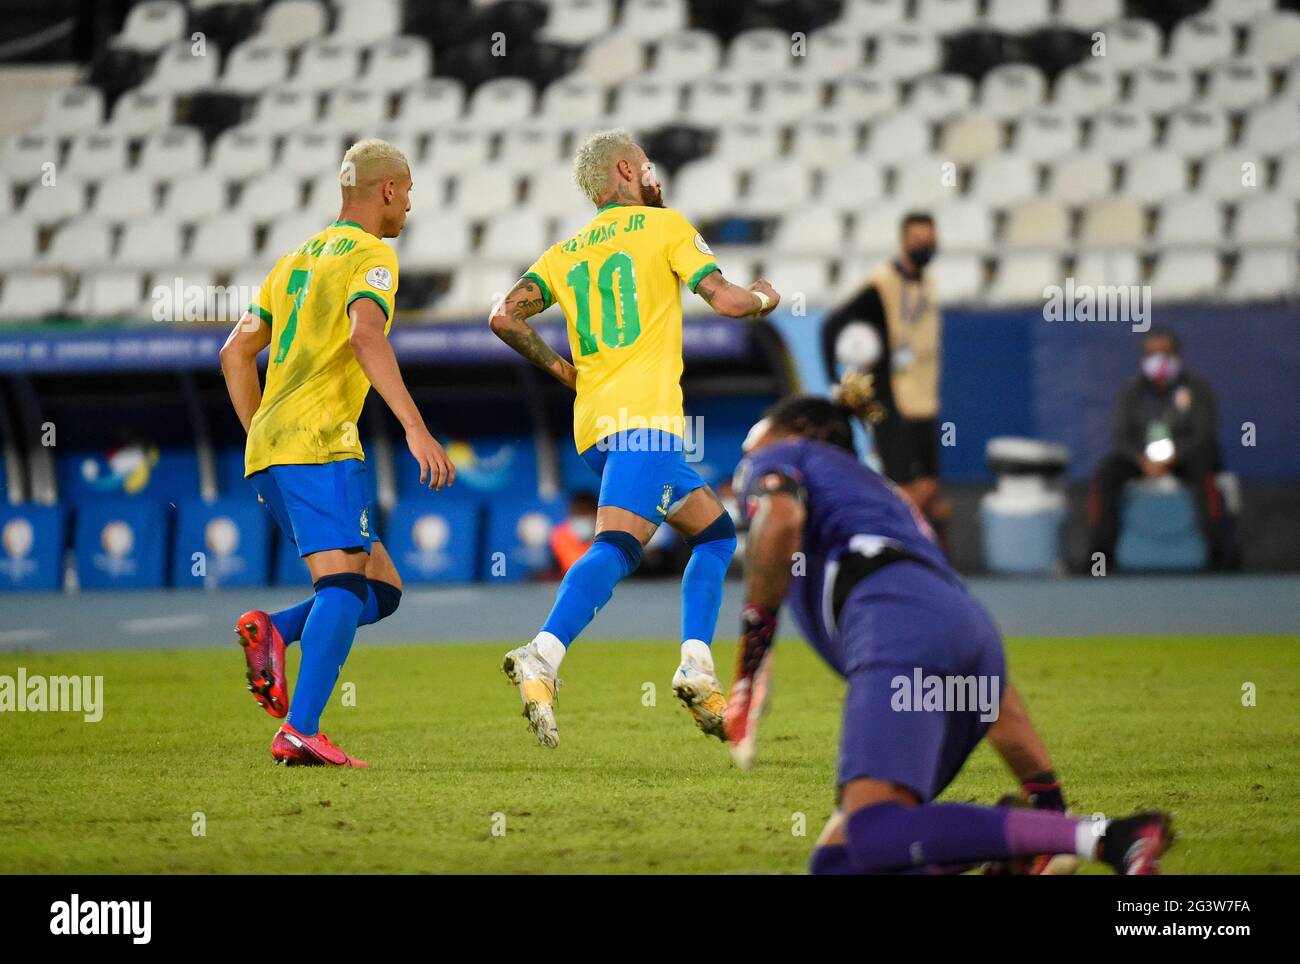 Rio de Janeiro, Brazil. 17th June, 2021: Brazil's Neymar, right, celebrates with teammate Richarlison after scoring his side's 2nd goal during a Copa America soccer match against Peru at Nilton Santos stadium in Rio de Janeiro, Brazil 17 Jun 2021 Credit: Andre Paes/Alamy Live News Stock Photo